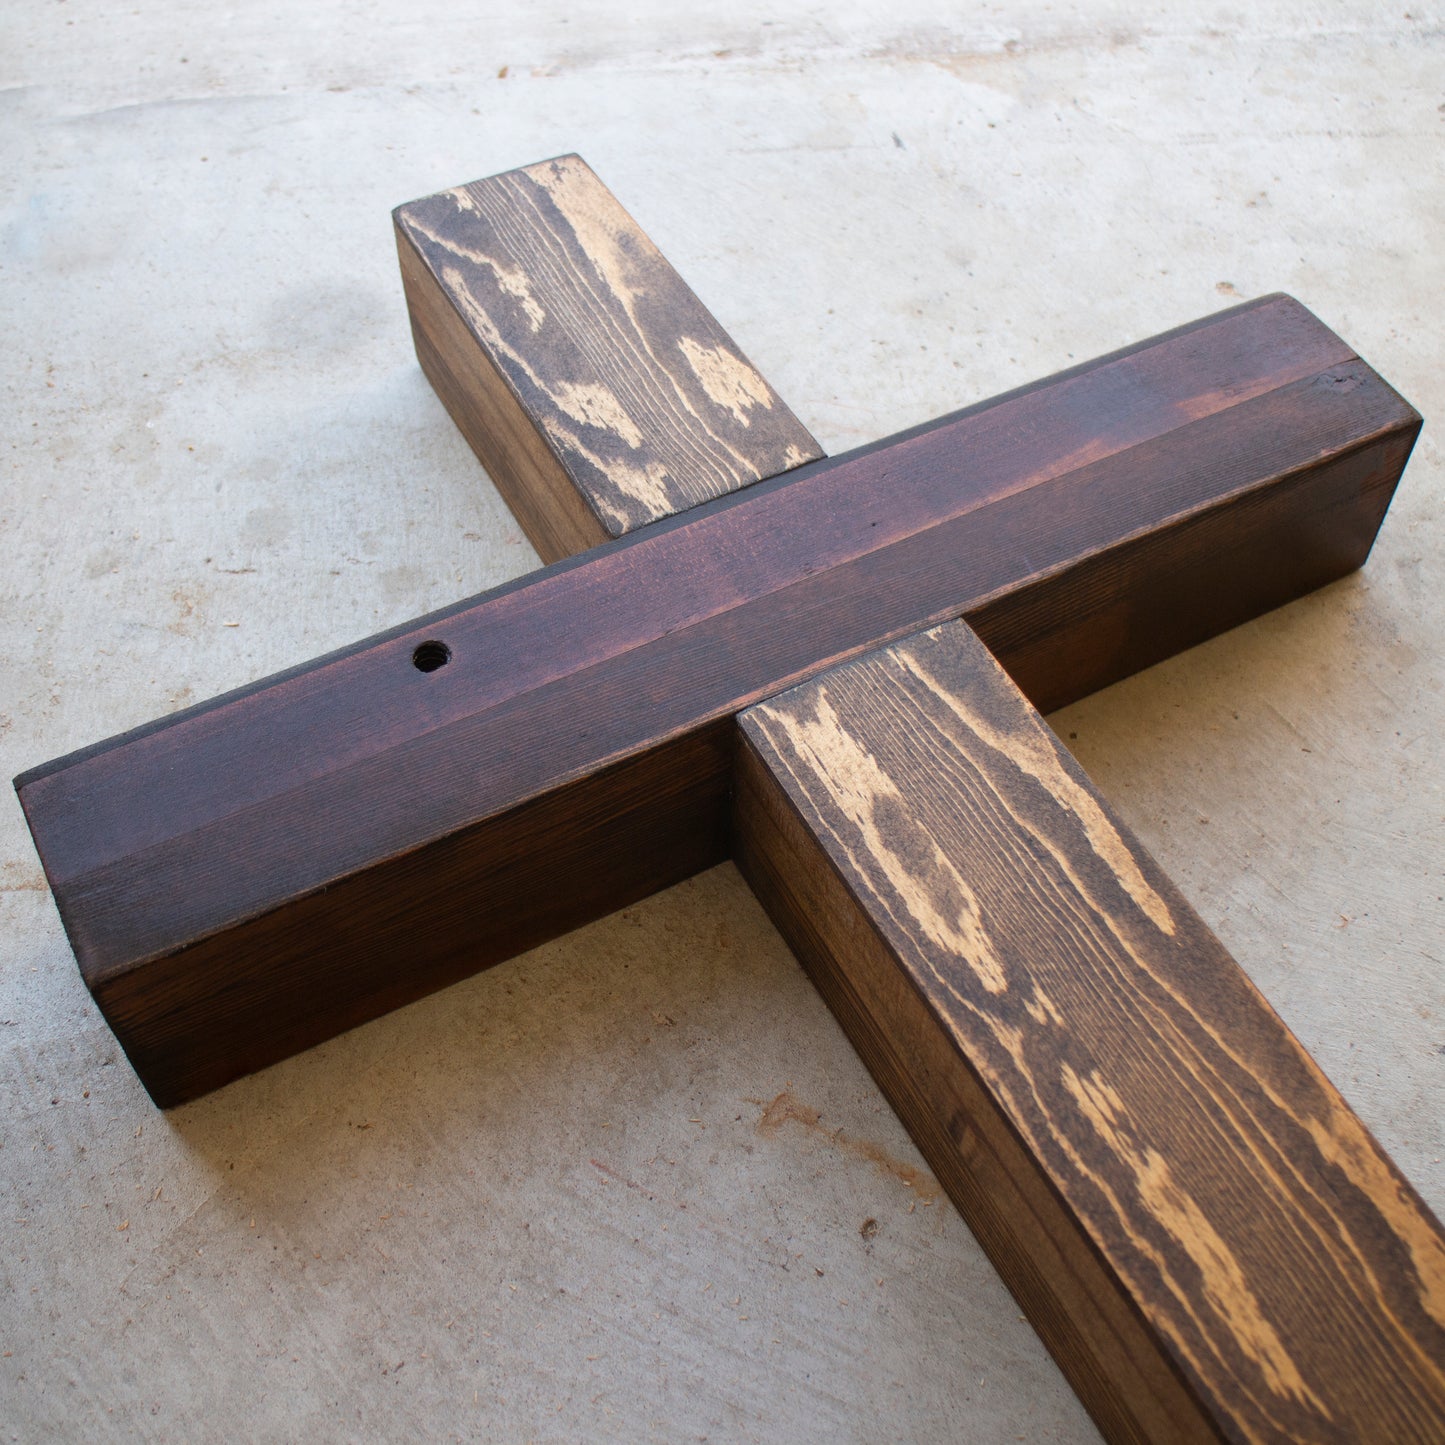 Simple Wooden Cross Project Plans For Sale